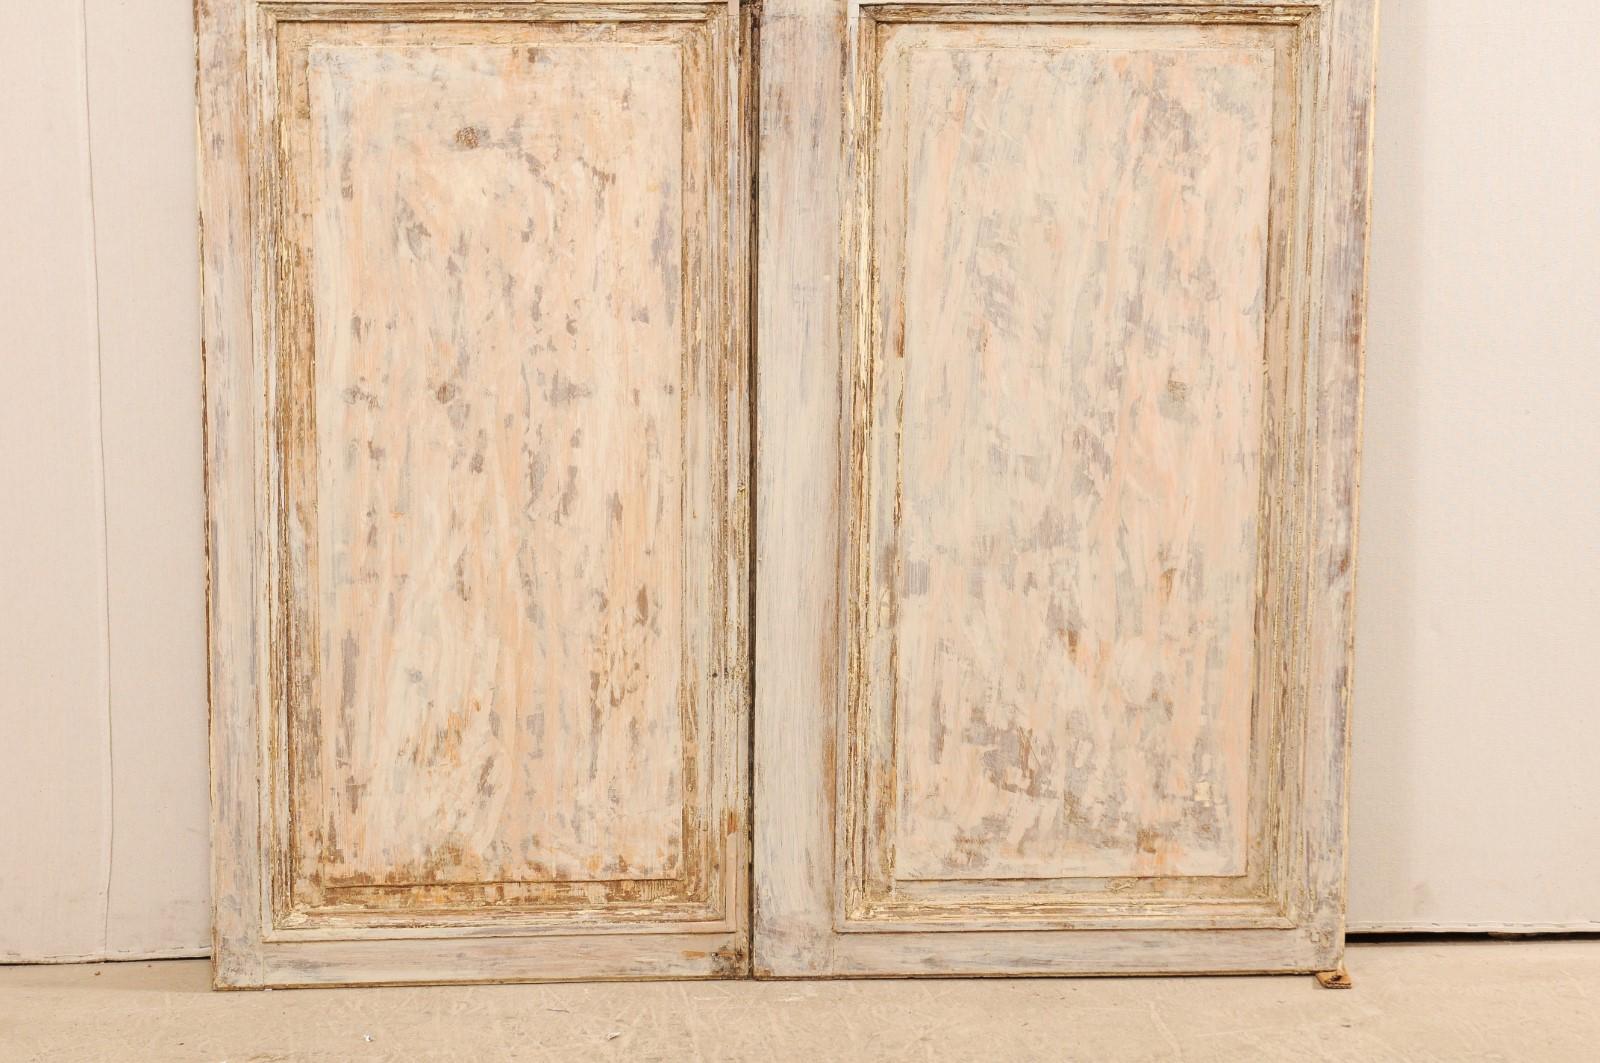 Carved Pair of 19th Century French Painted Wood Doors with Lovely Cream Colored Finish